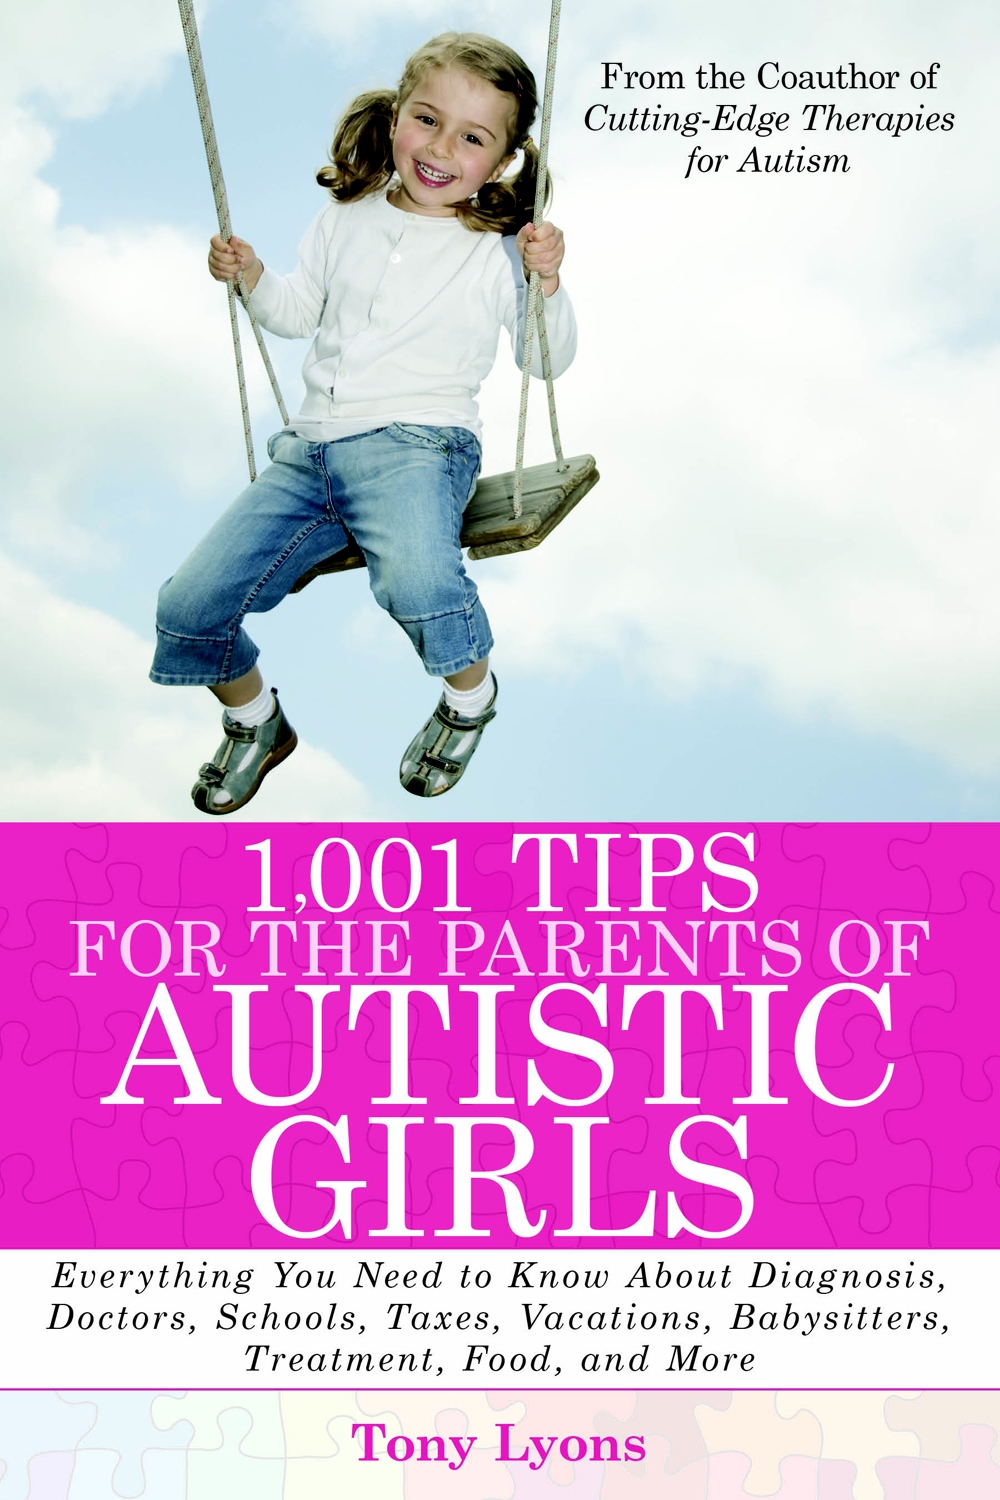 1,001 Tips for the Parents of Autistic Girls